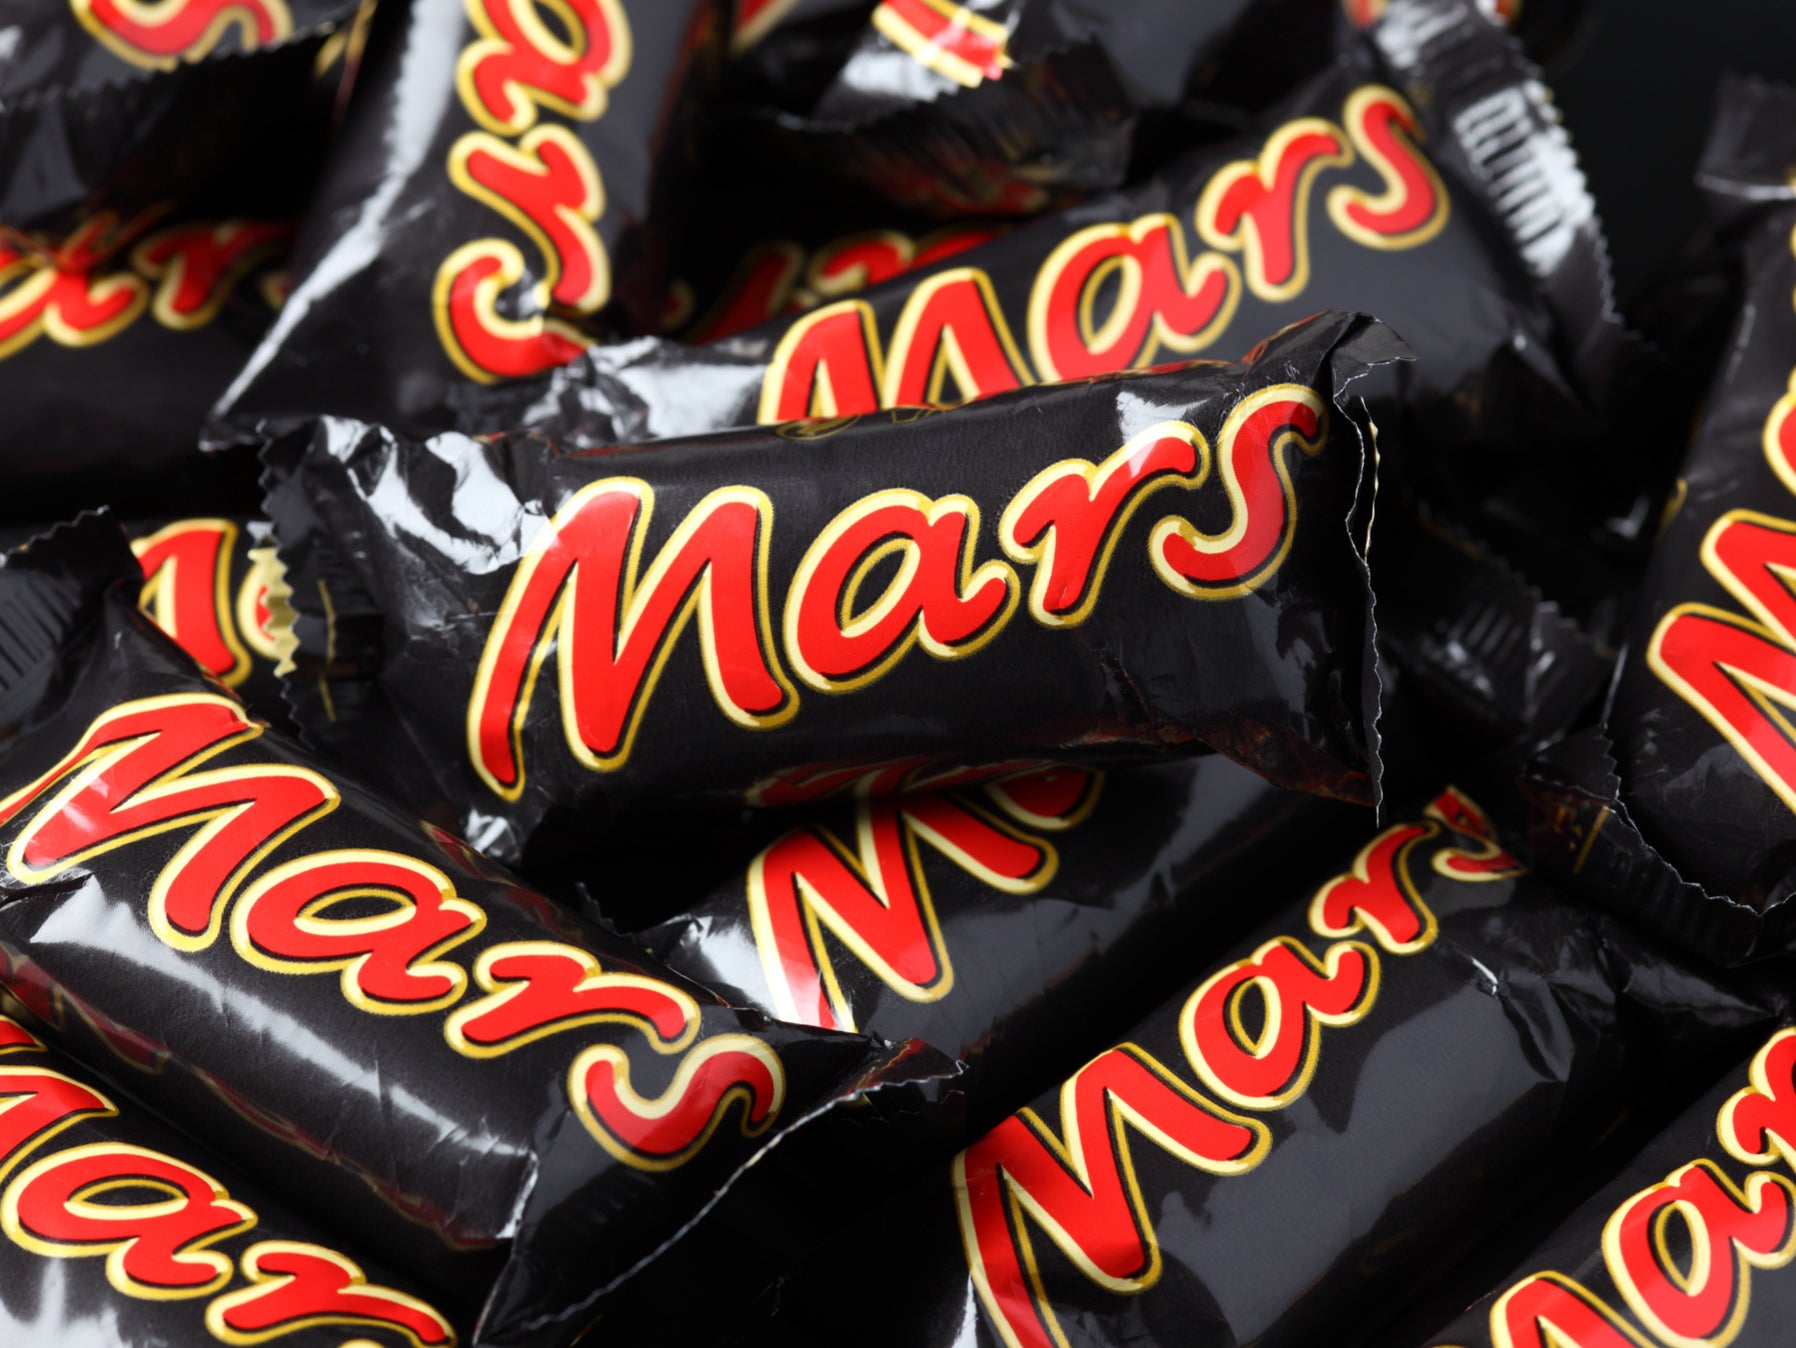 Mars pledges to make chocolate bars sold in the UK carbon neutral by 2023